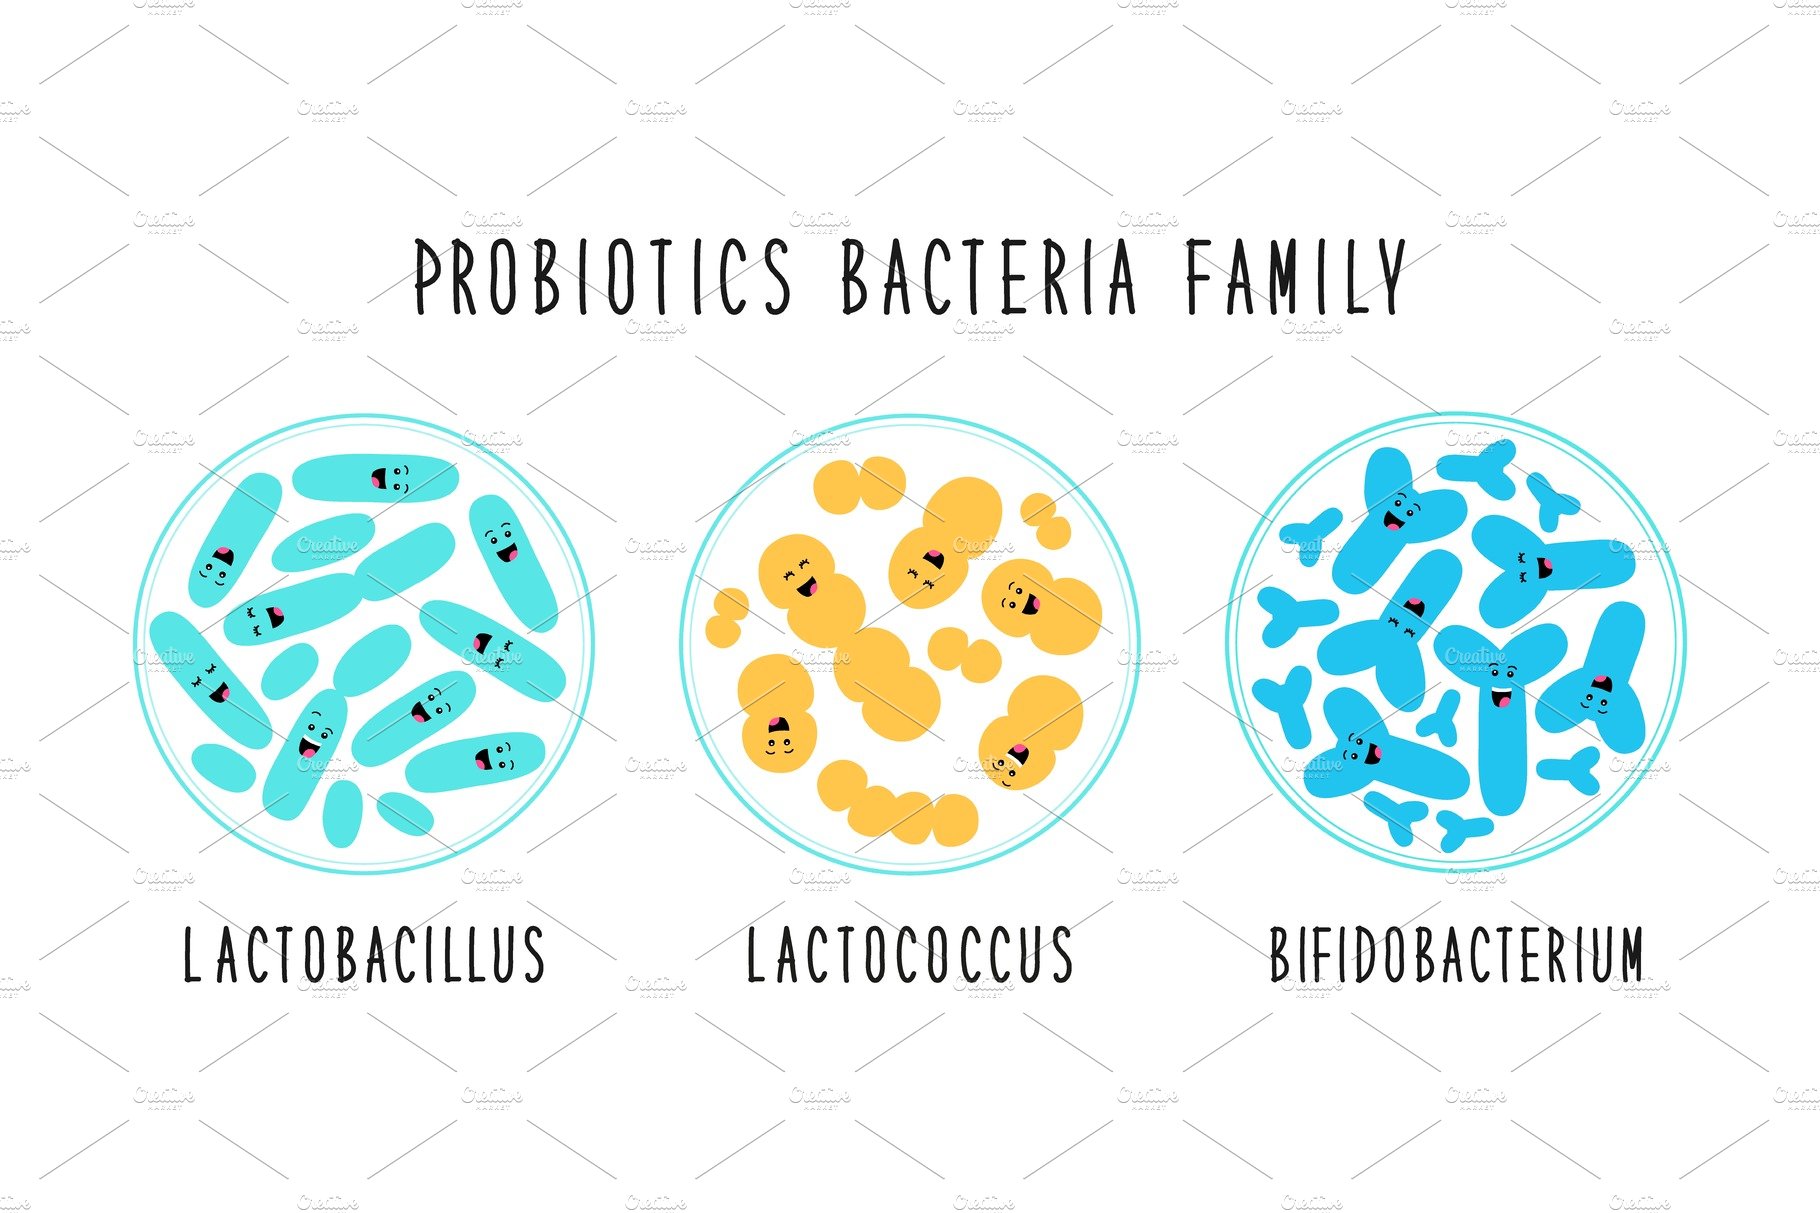 Funny probiotics bacteria family cover image.